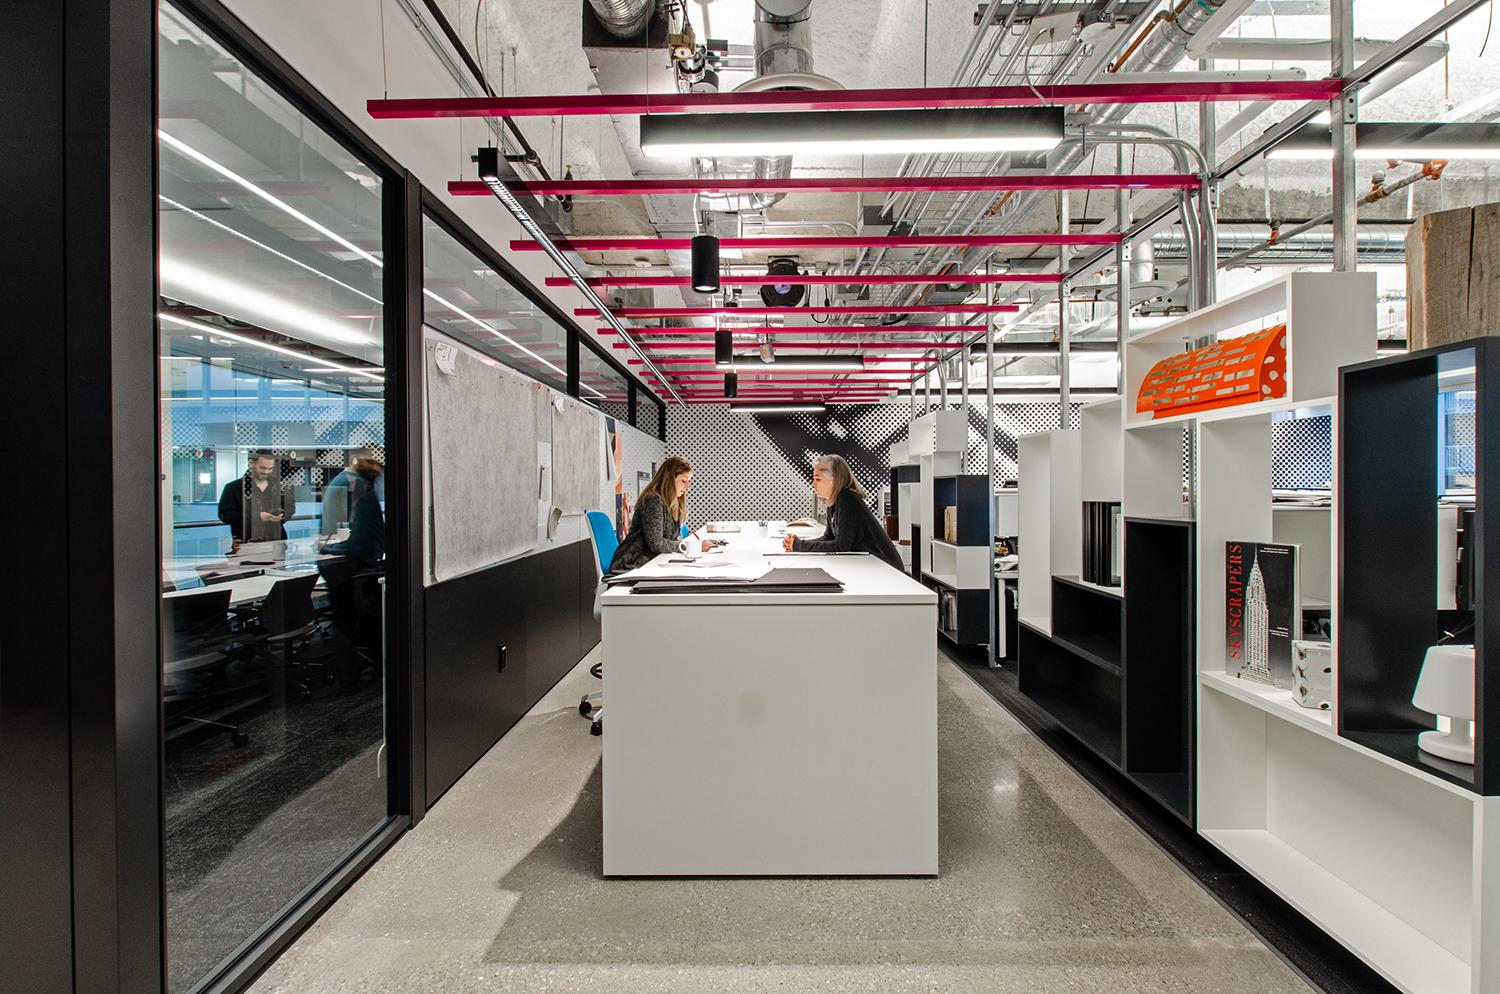 Open concept office with shelving displays.